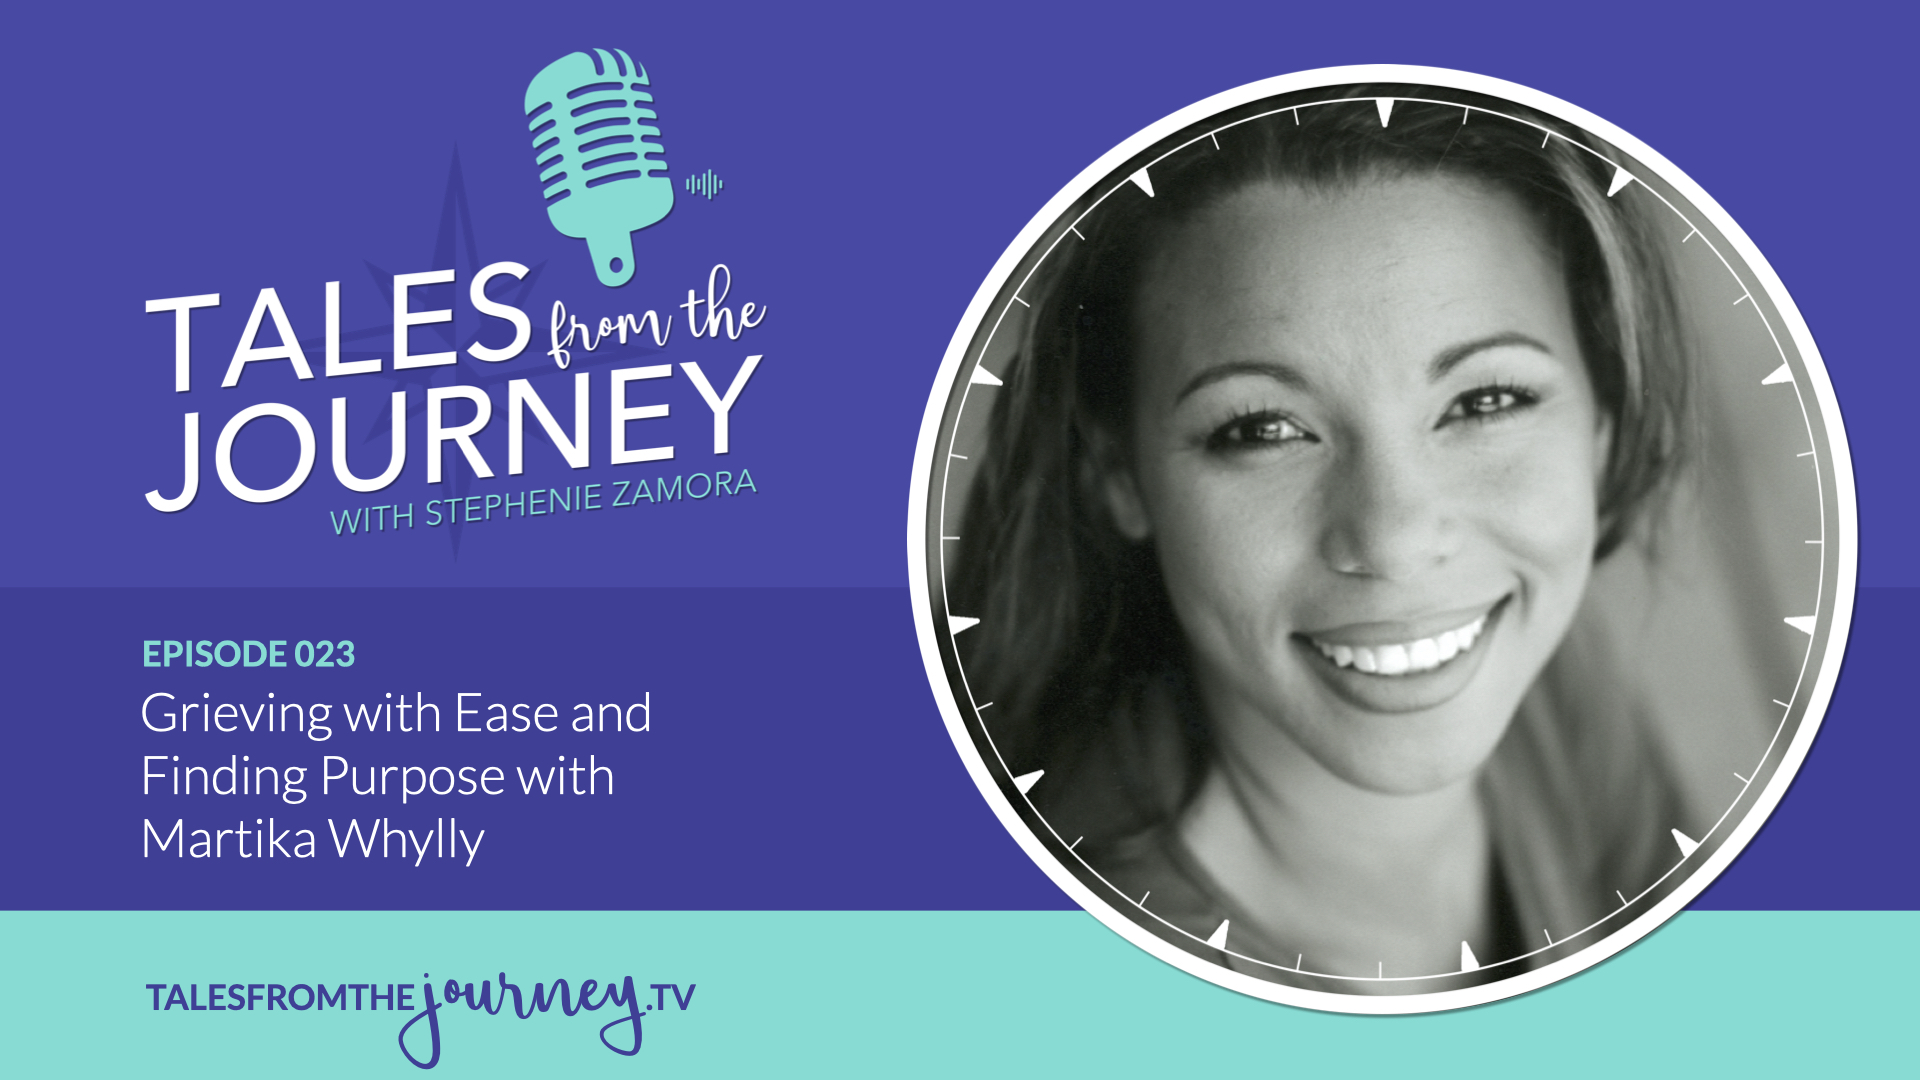 Grieving with Ease and Finding Purpose with Martika Whylly